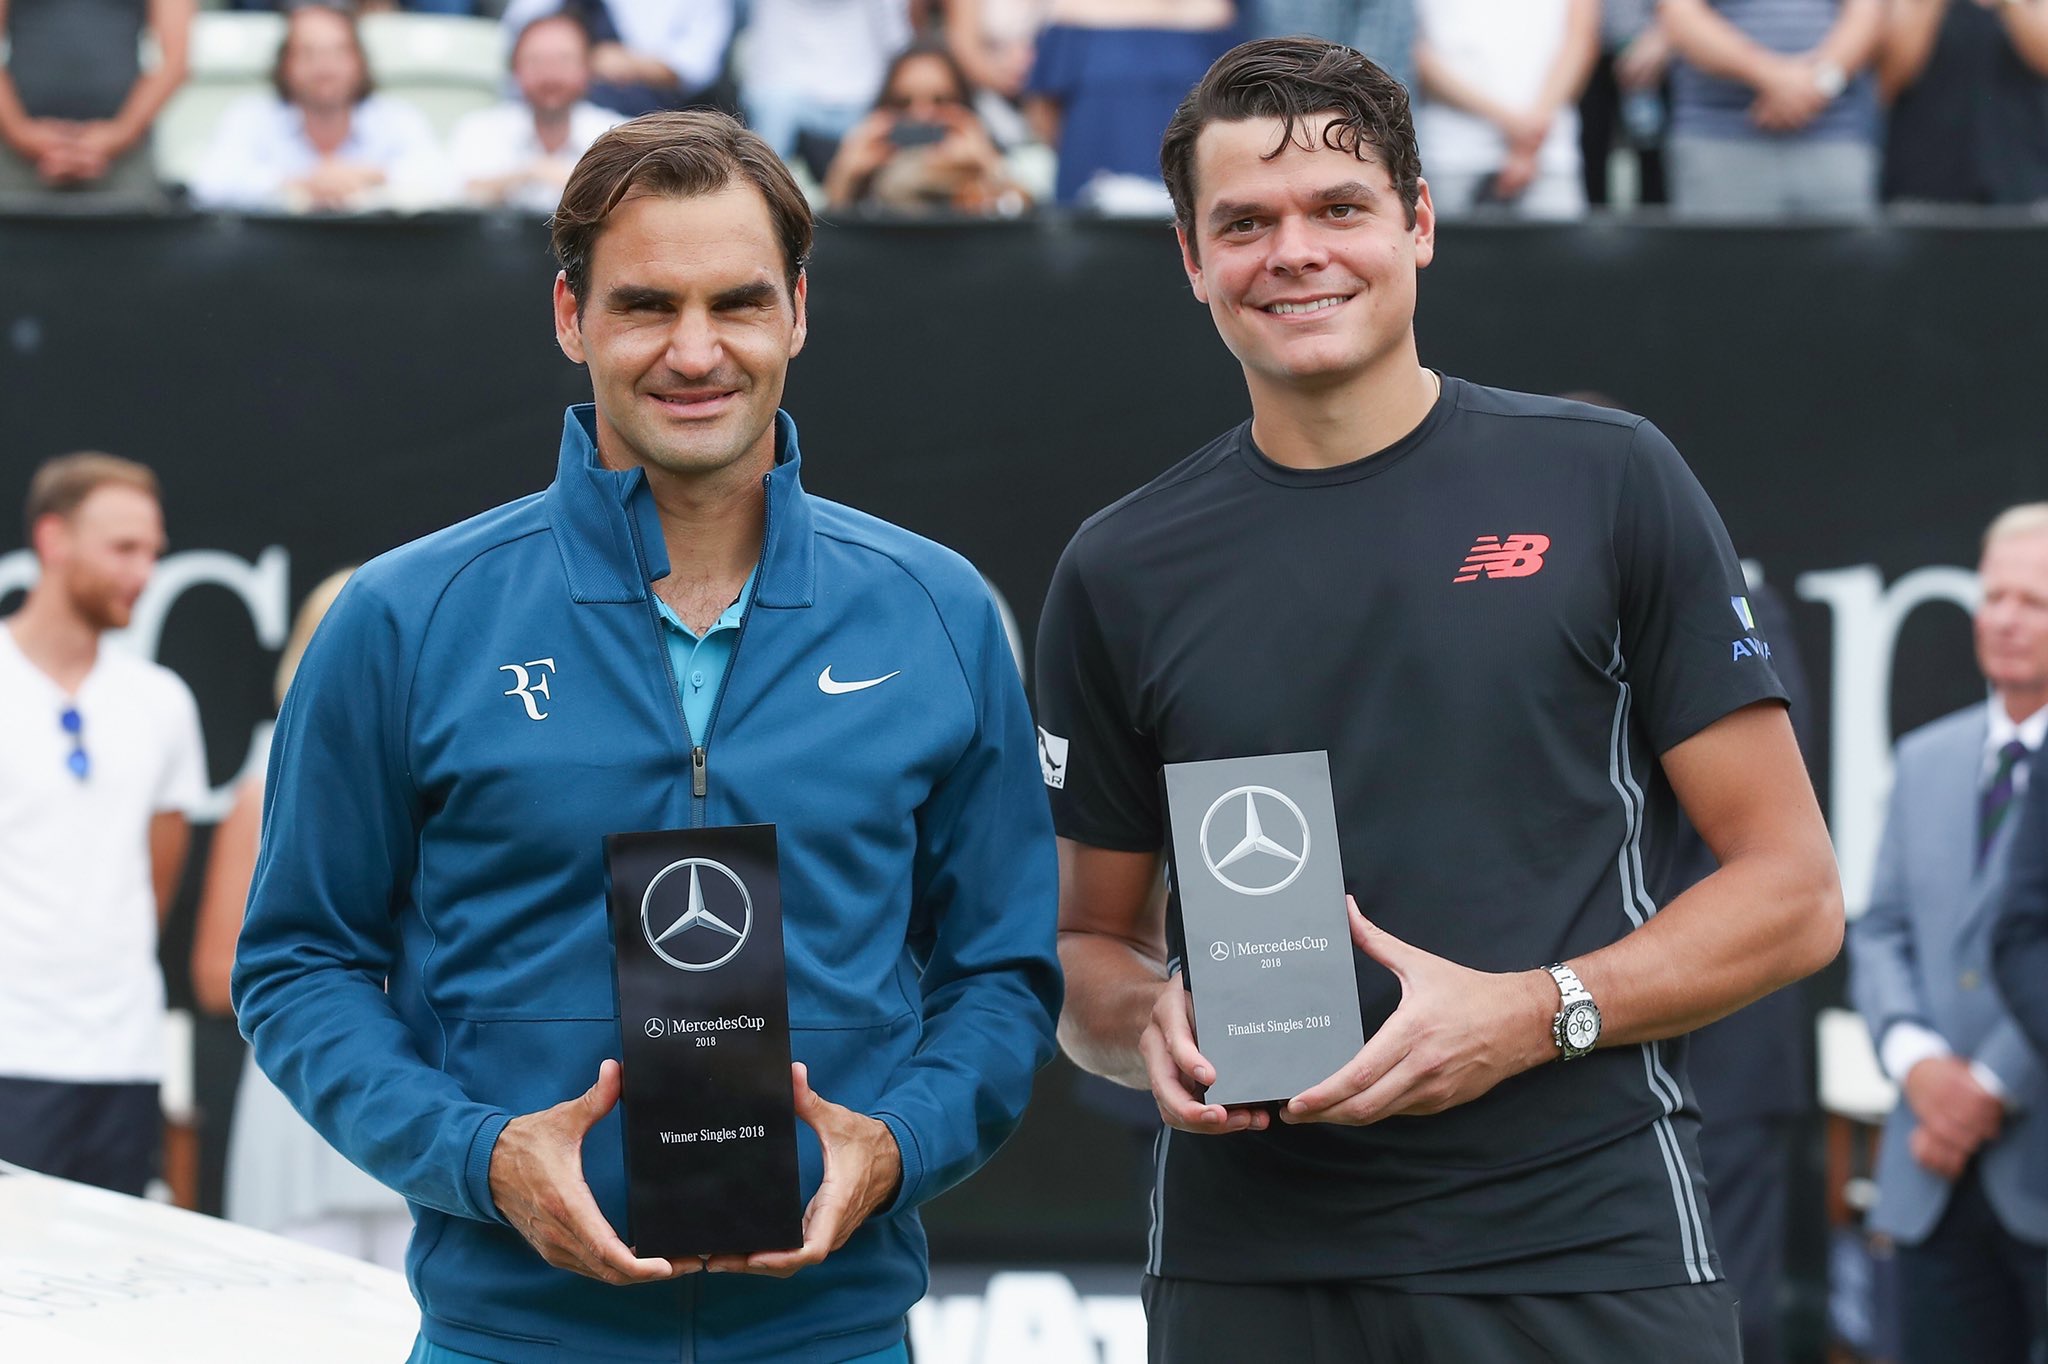 Federer Wins Mercedes Cup for 98th Career Title